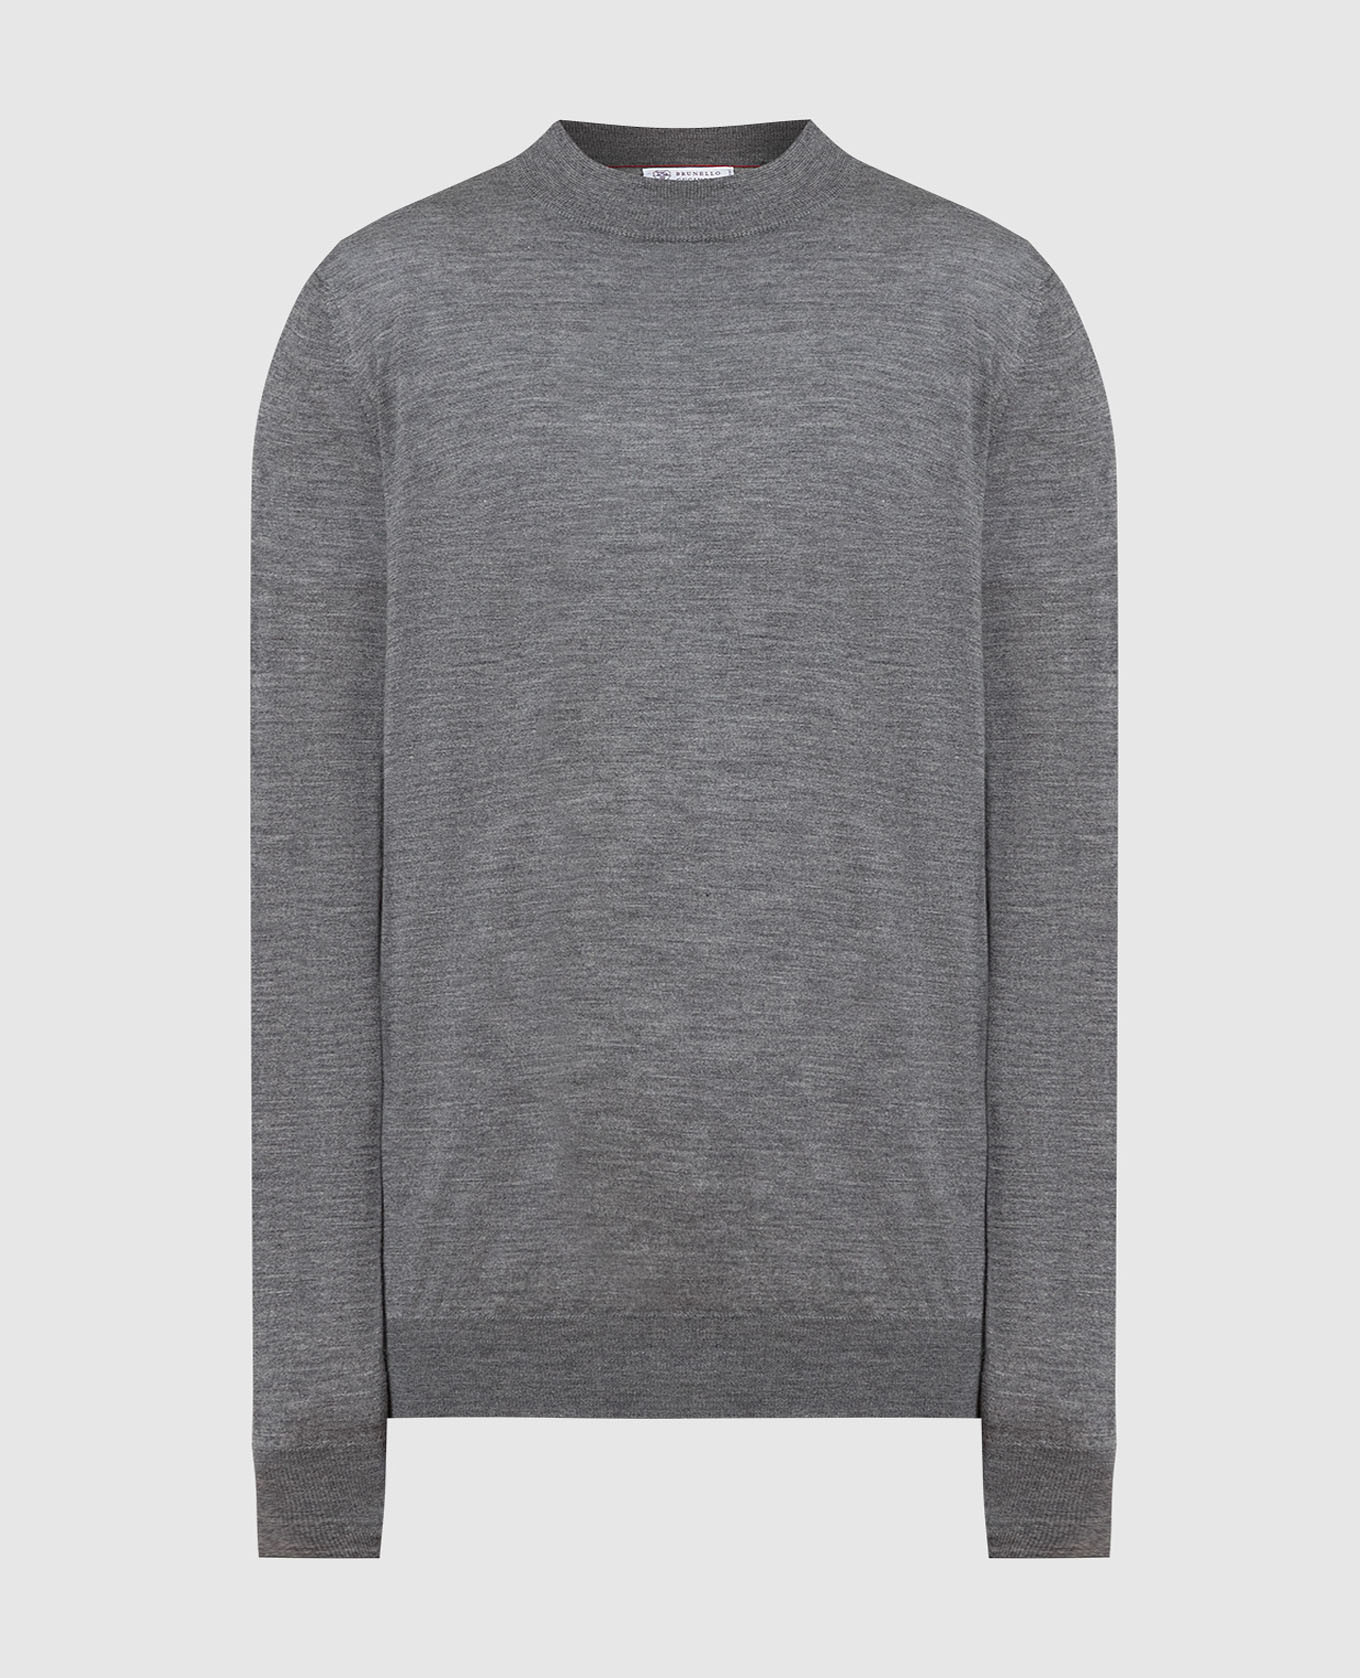 Gray wool and cashmere jumper